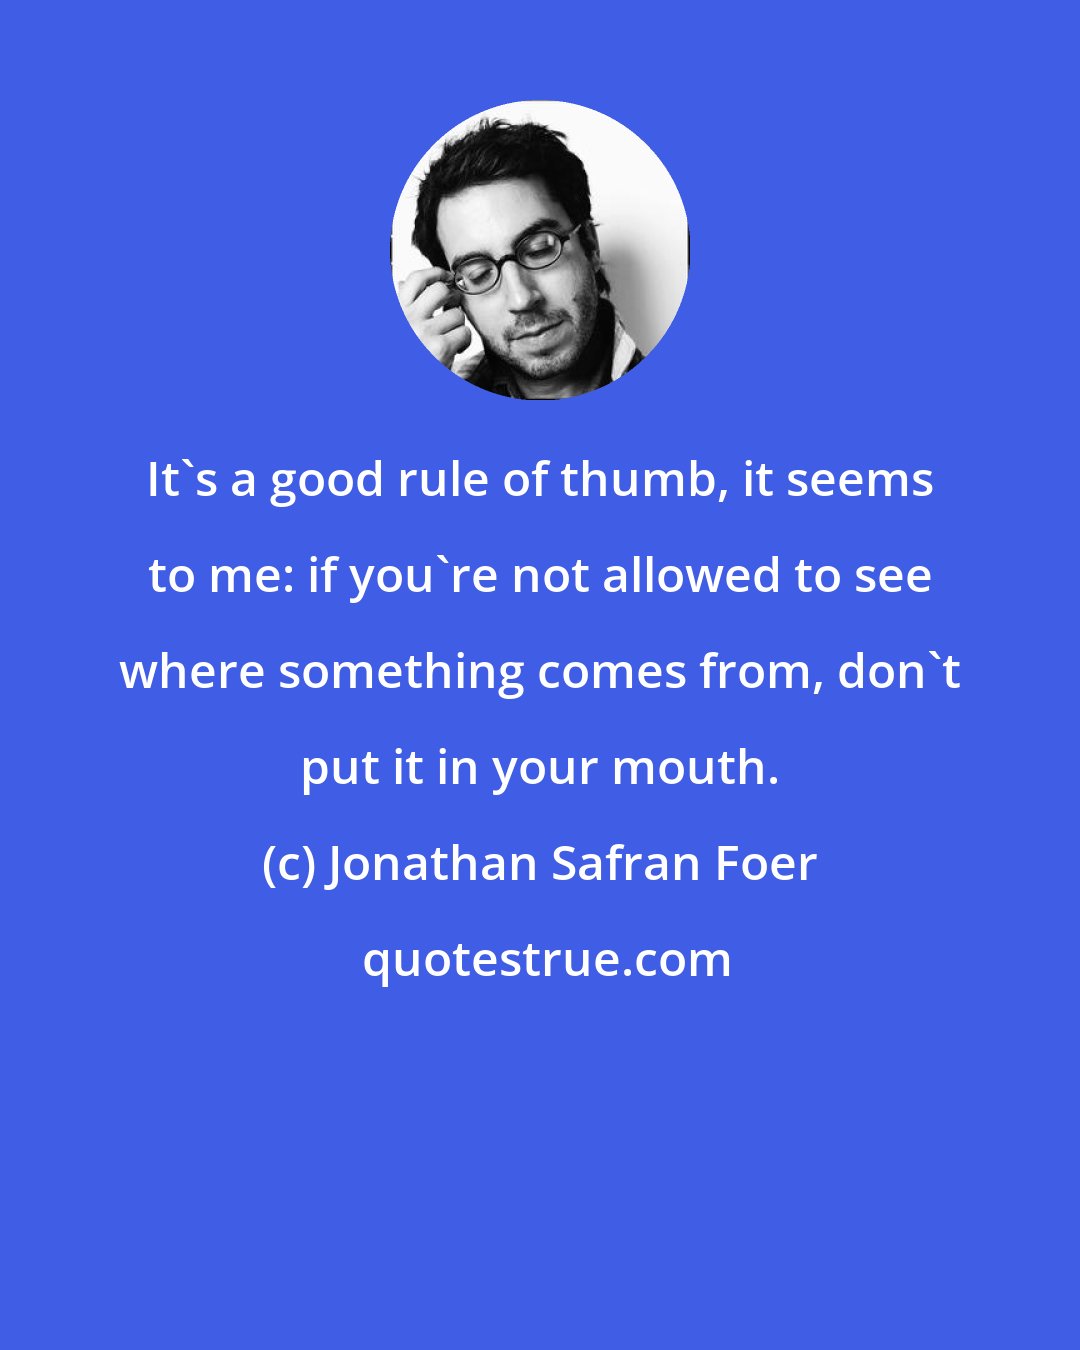 Jonathan Safran Foer: It's a good rule of thumb, it seems to me: if you're not allowed to see where something comes from, don't put it in your mouth.